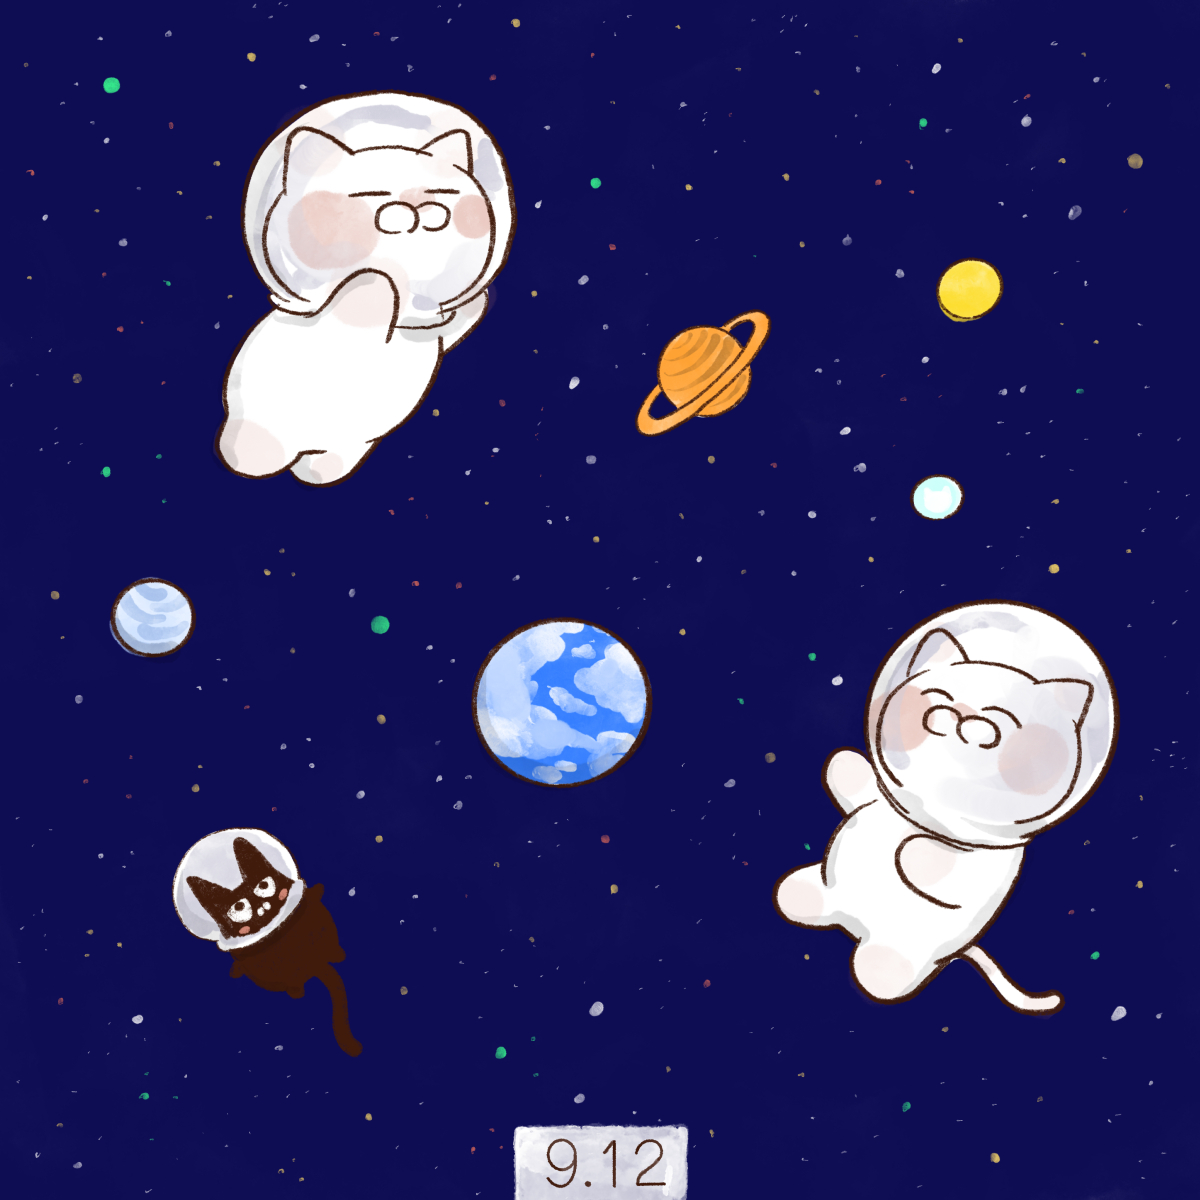 space cat no humans planet earth (planet) glasses white cat  illustration images